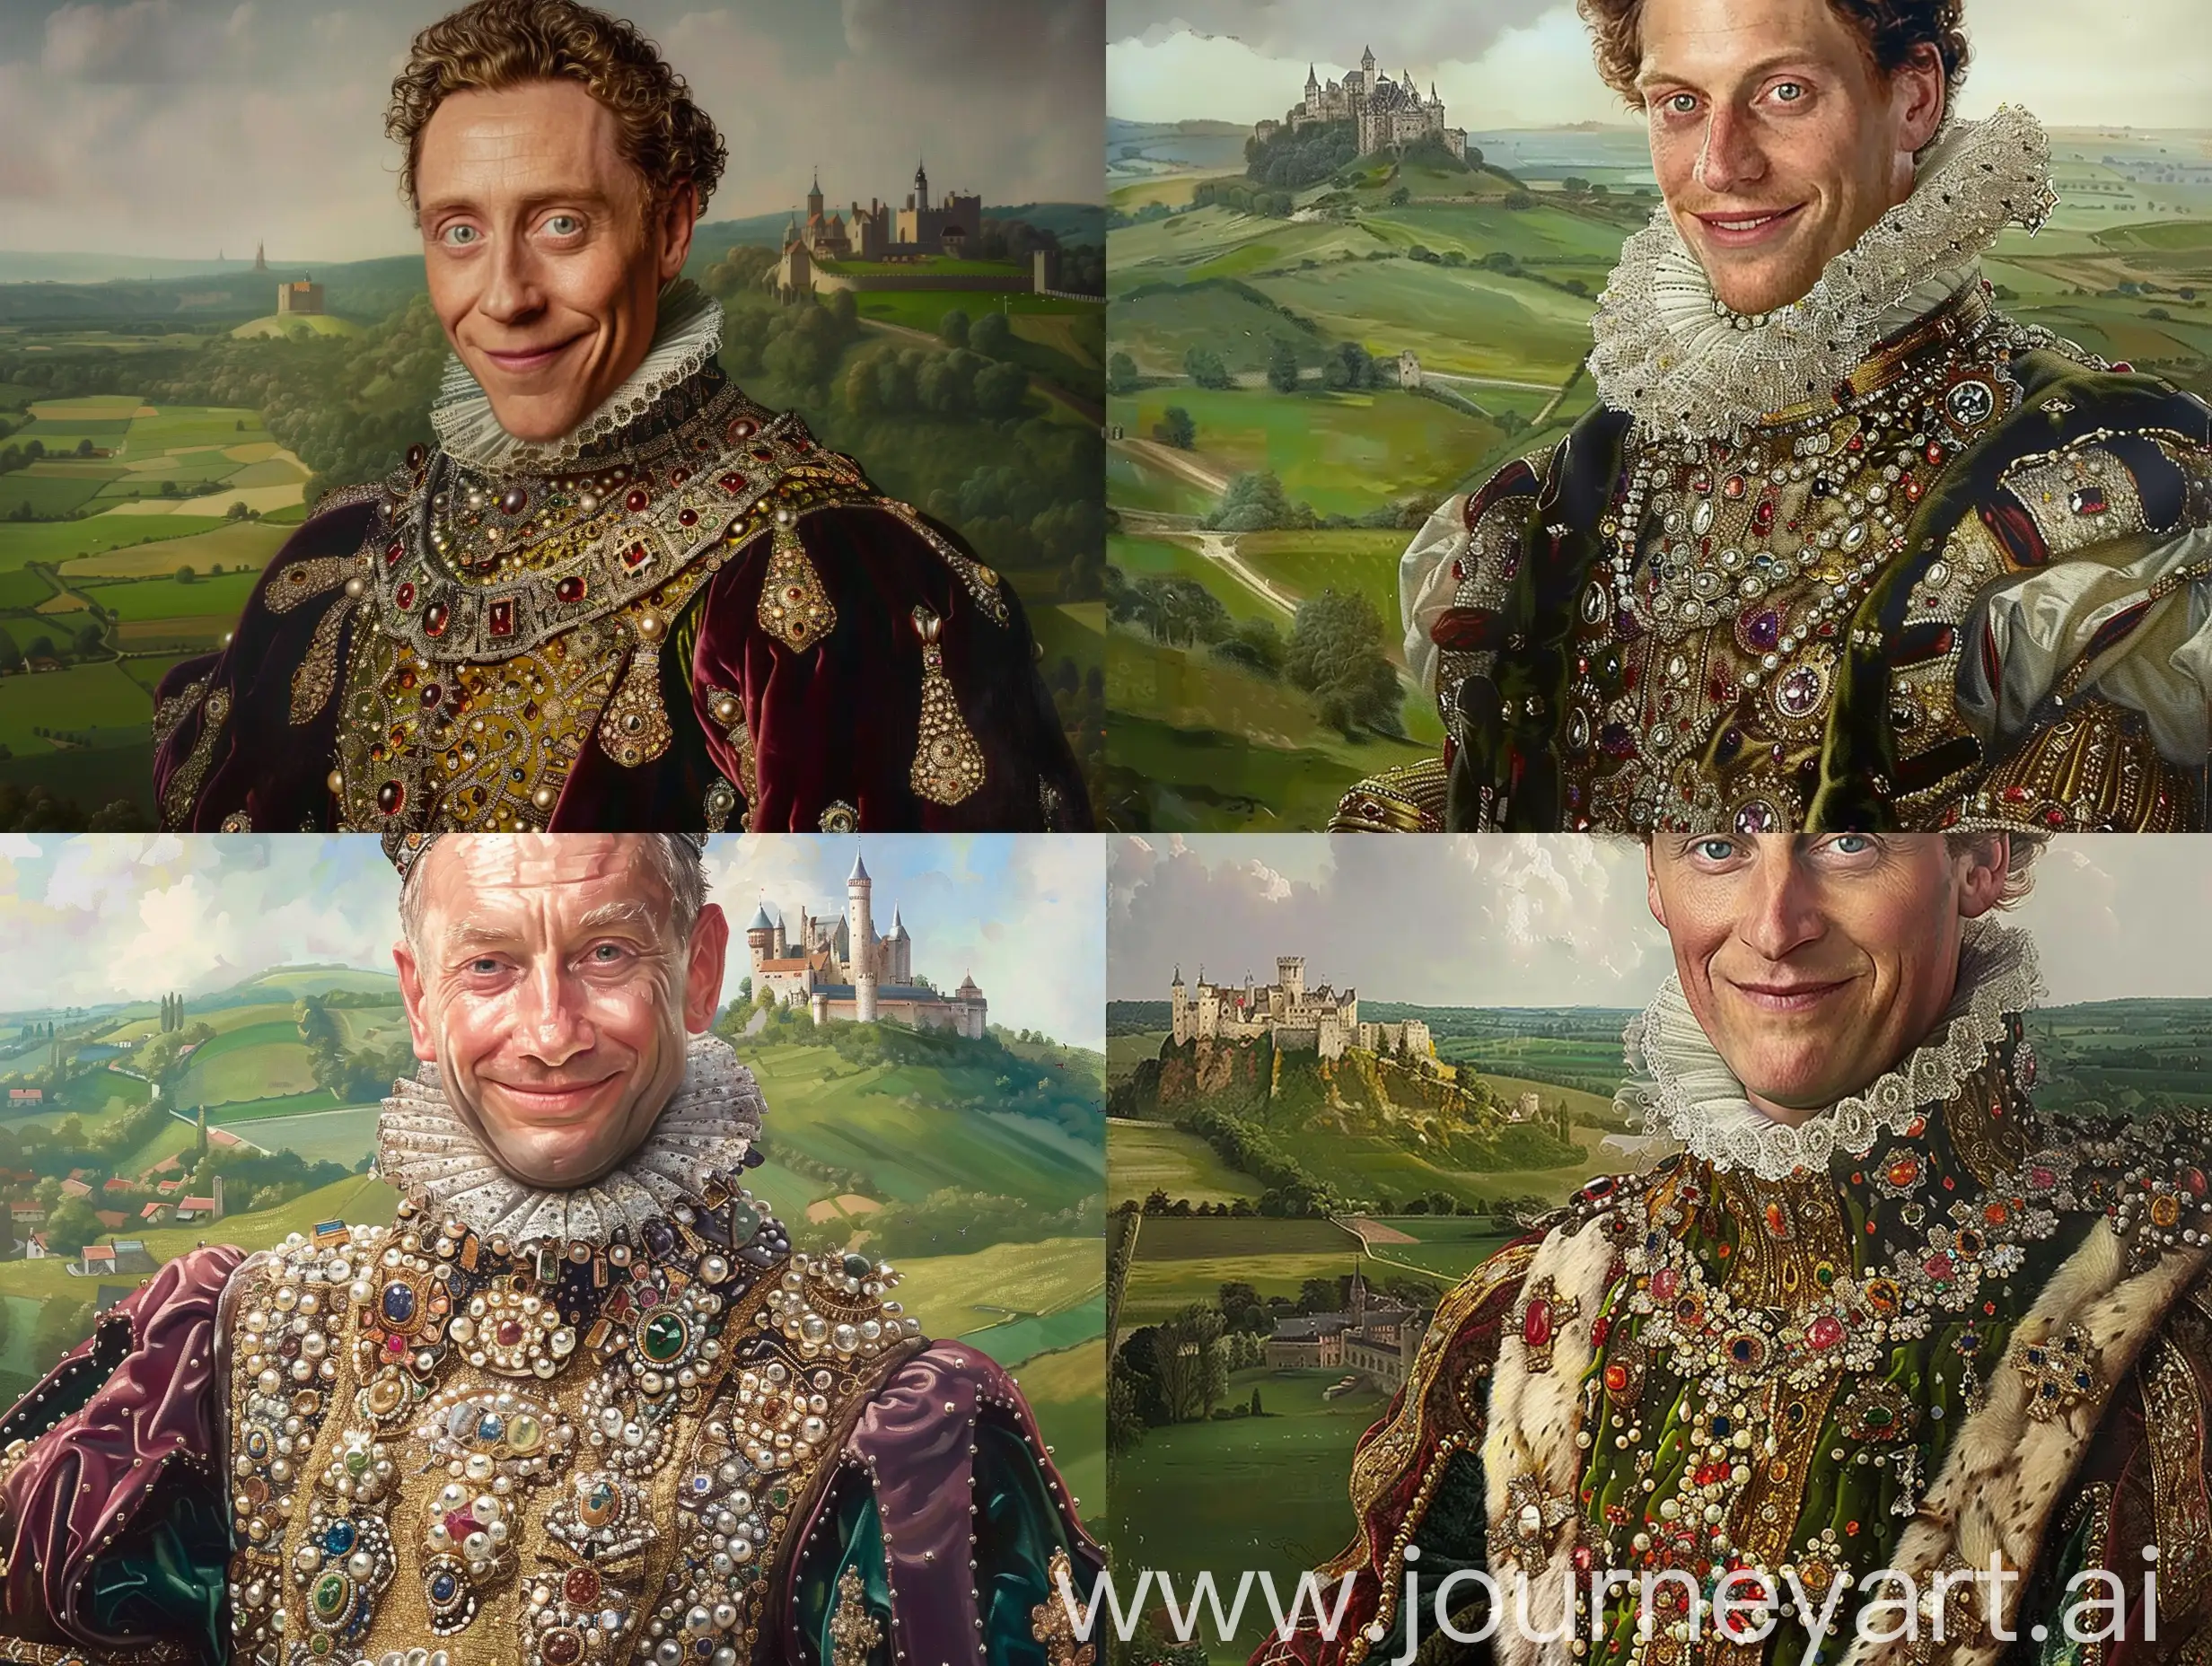 a slick oil painting of king Henry V111 looking very handsome, his costume covered in elaborate jewels and velvet. He has warm smiling shiny eyes and a slight subtle smile. behind him are green medieval  pastures and a castle on a hill.